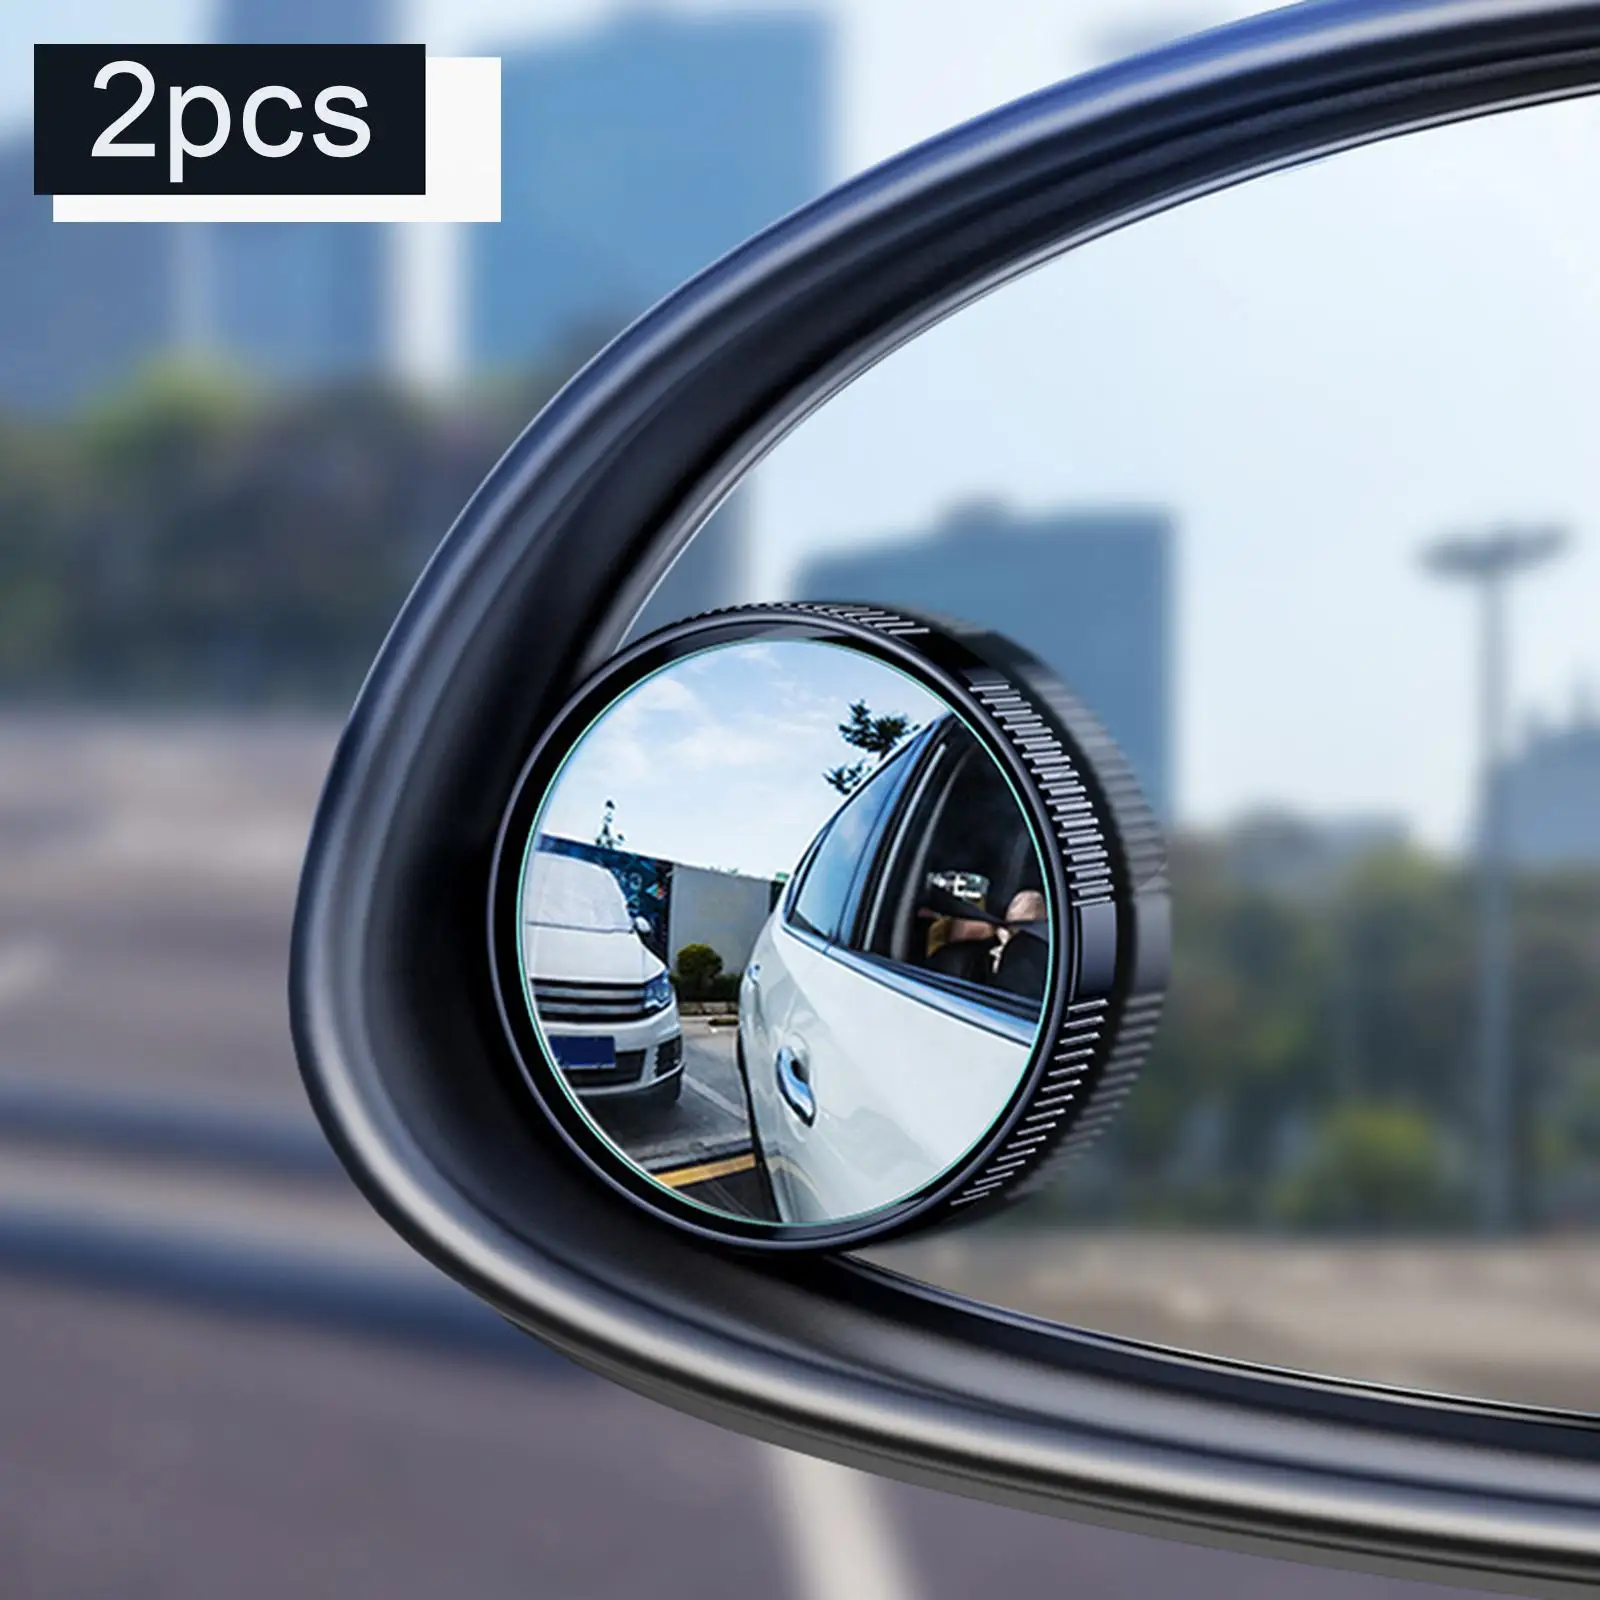 2 Pieces Spot Mirrors, Adjustable Housing Convex Mirror for Cars SUV Trucks